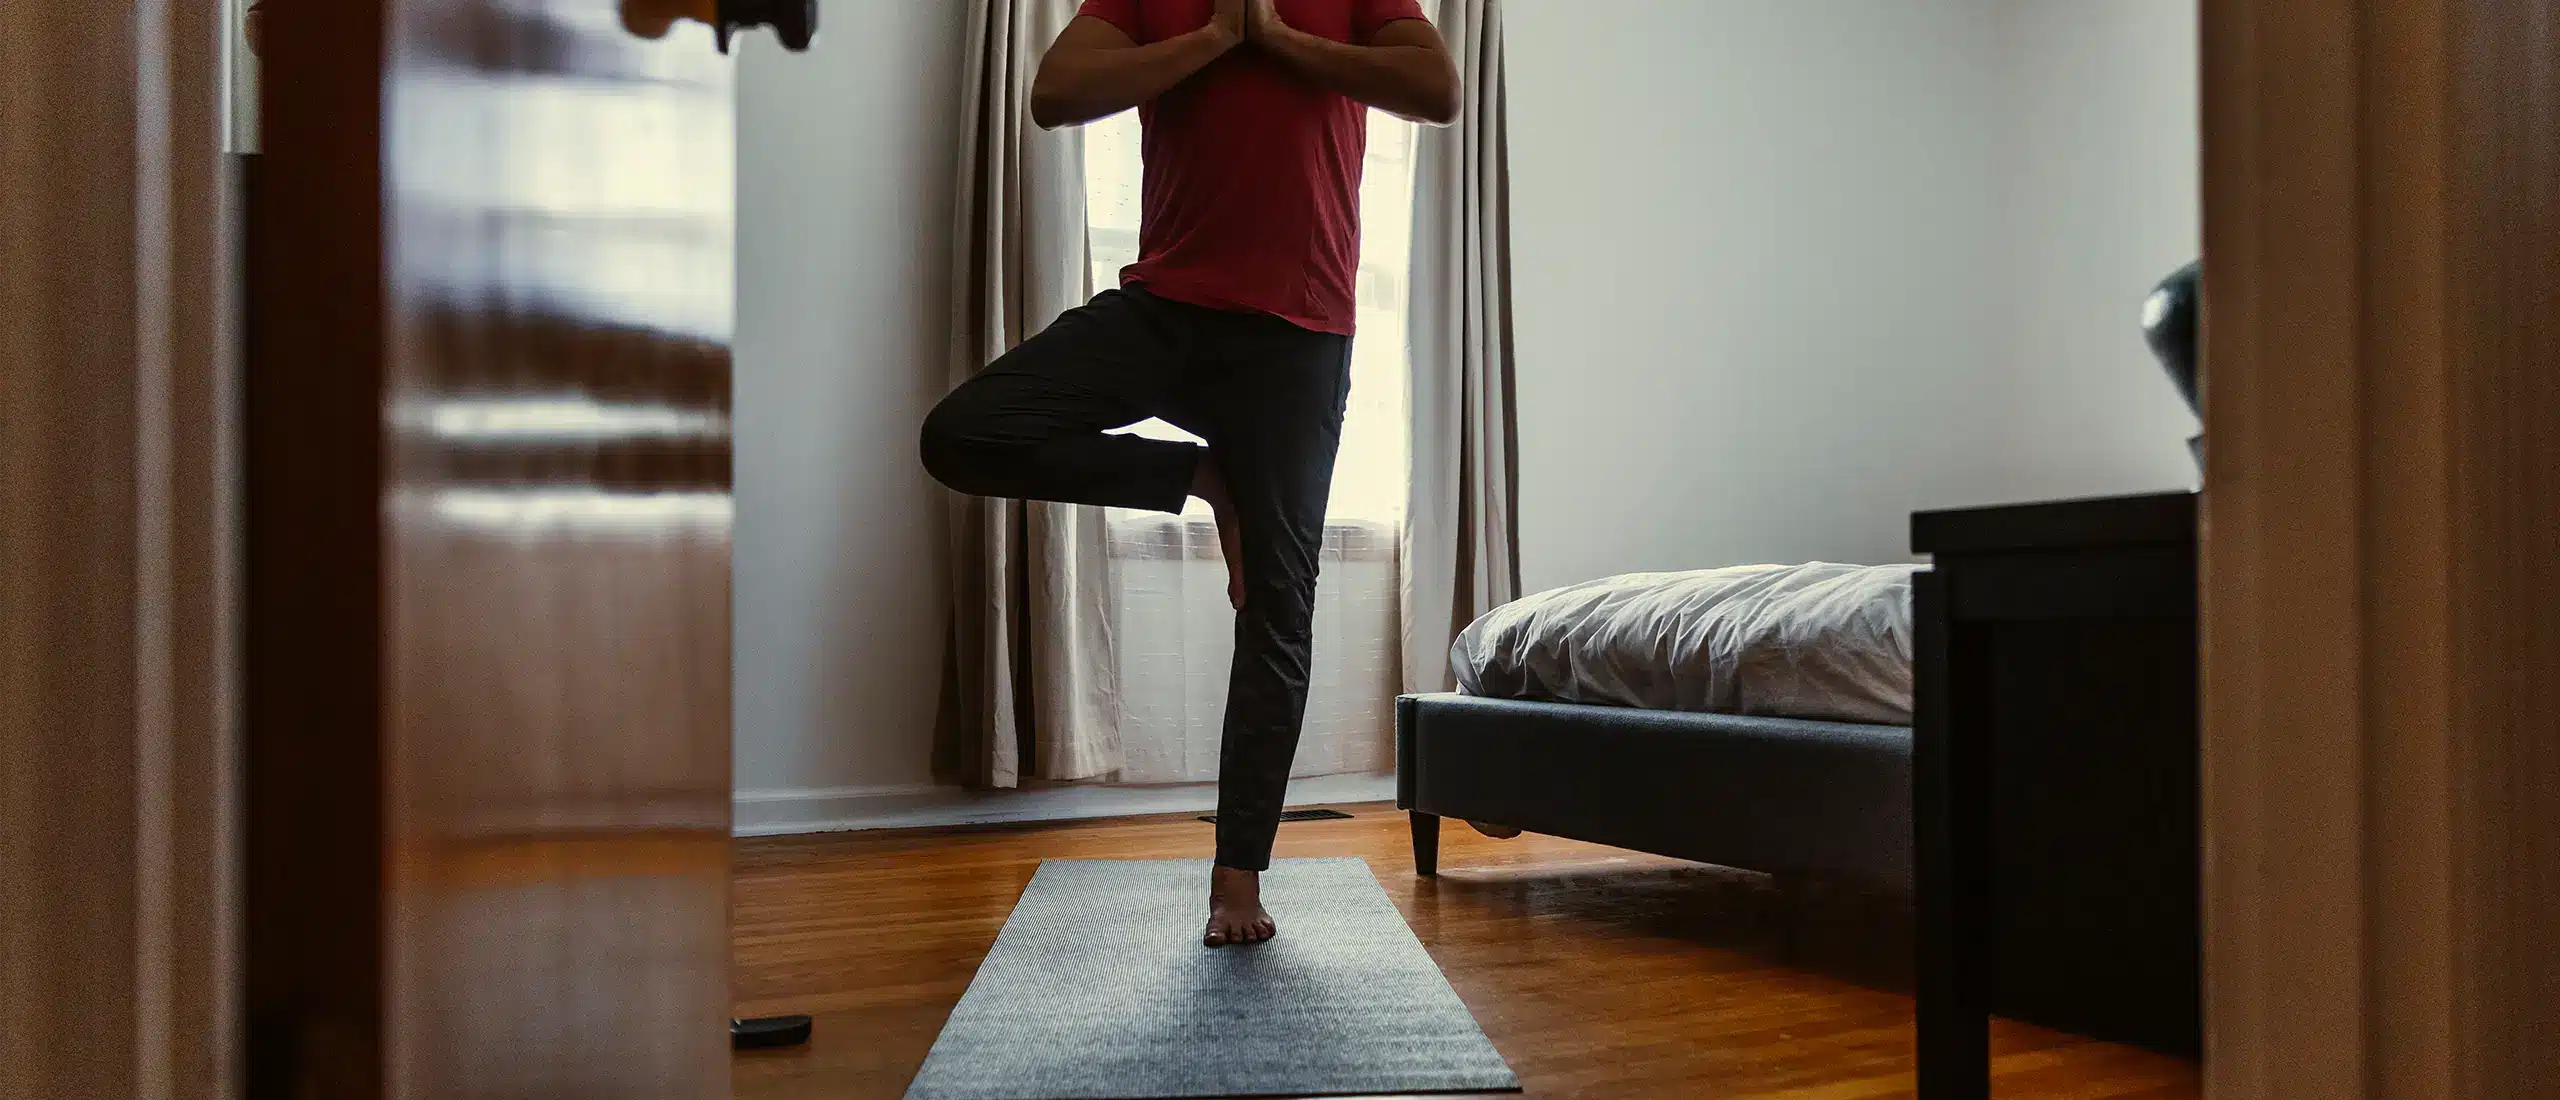 Man balancing on one foot on a yoga mat in a bedroom.